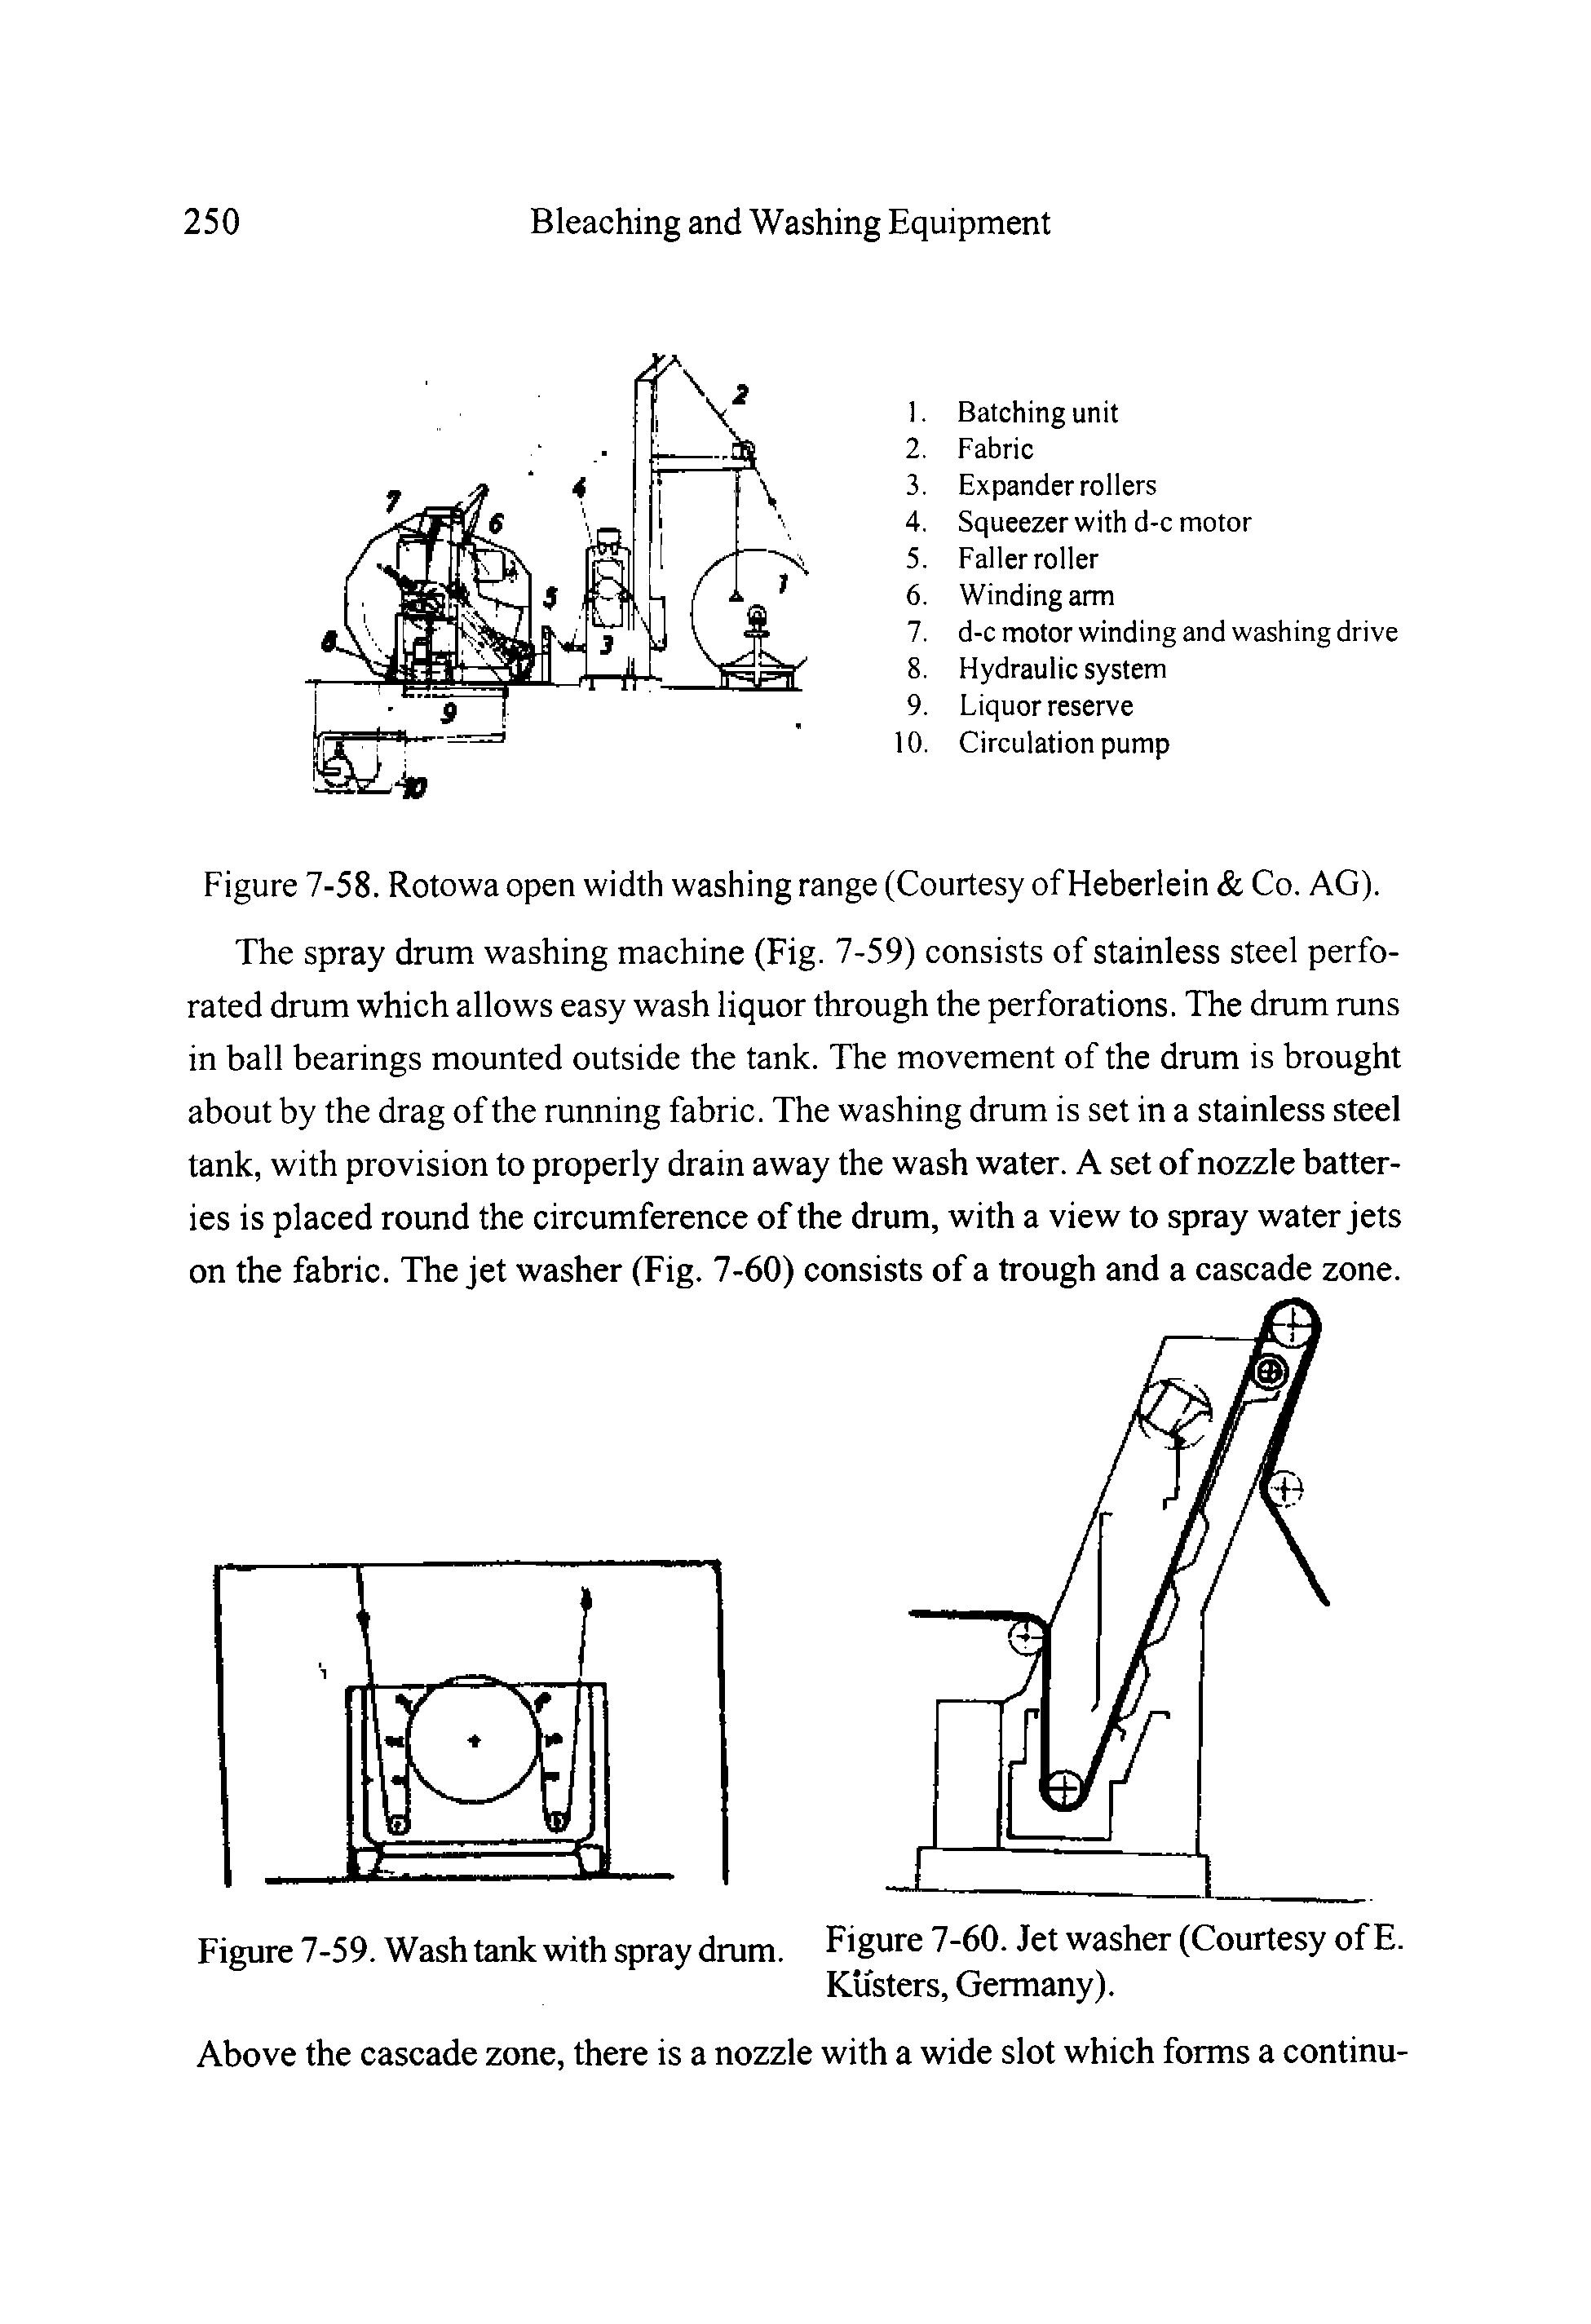 Figure 7-59. Wash tank with spray drum. Figure 7-60. Jet washer (Courtesy of E.